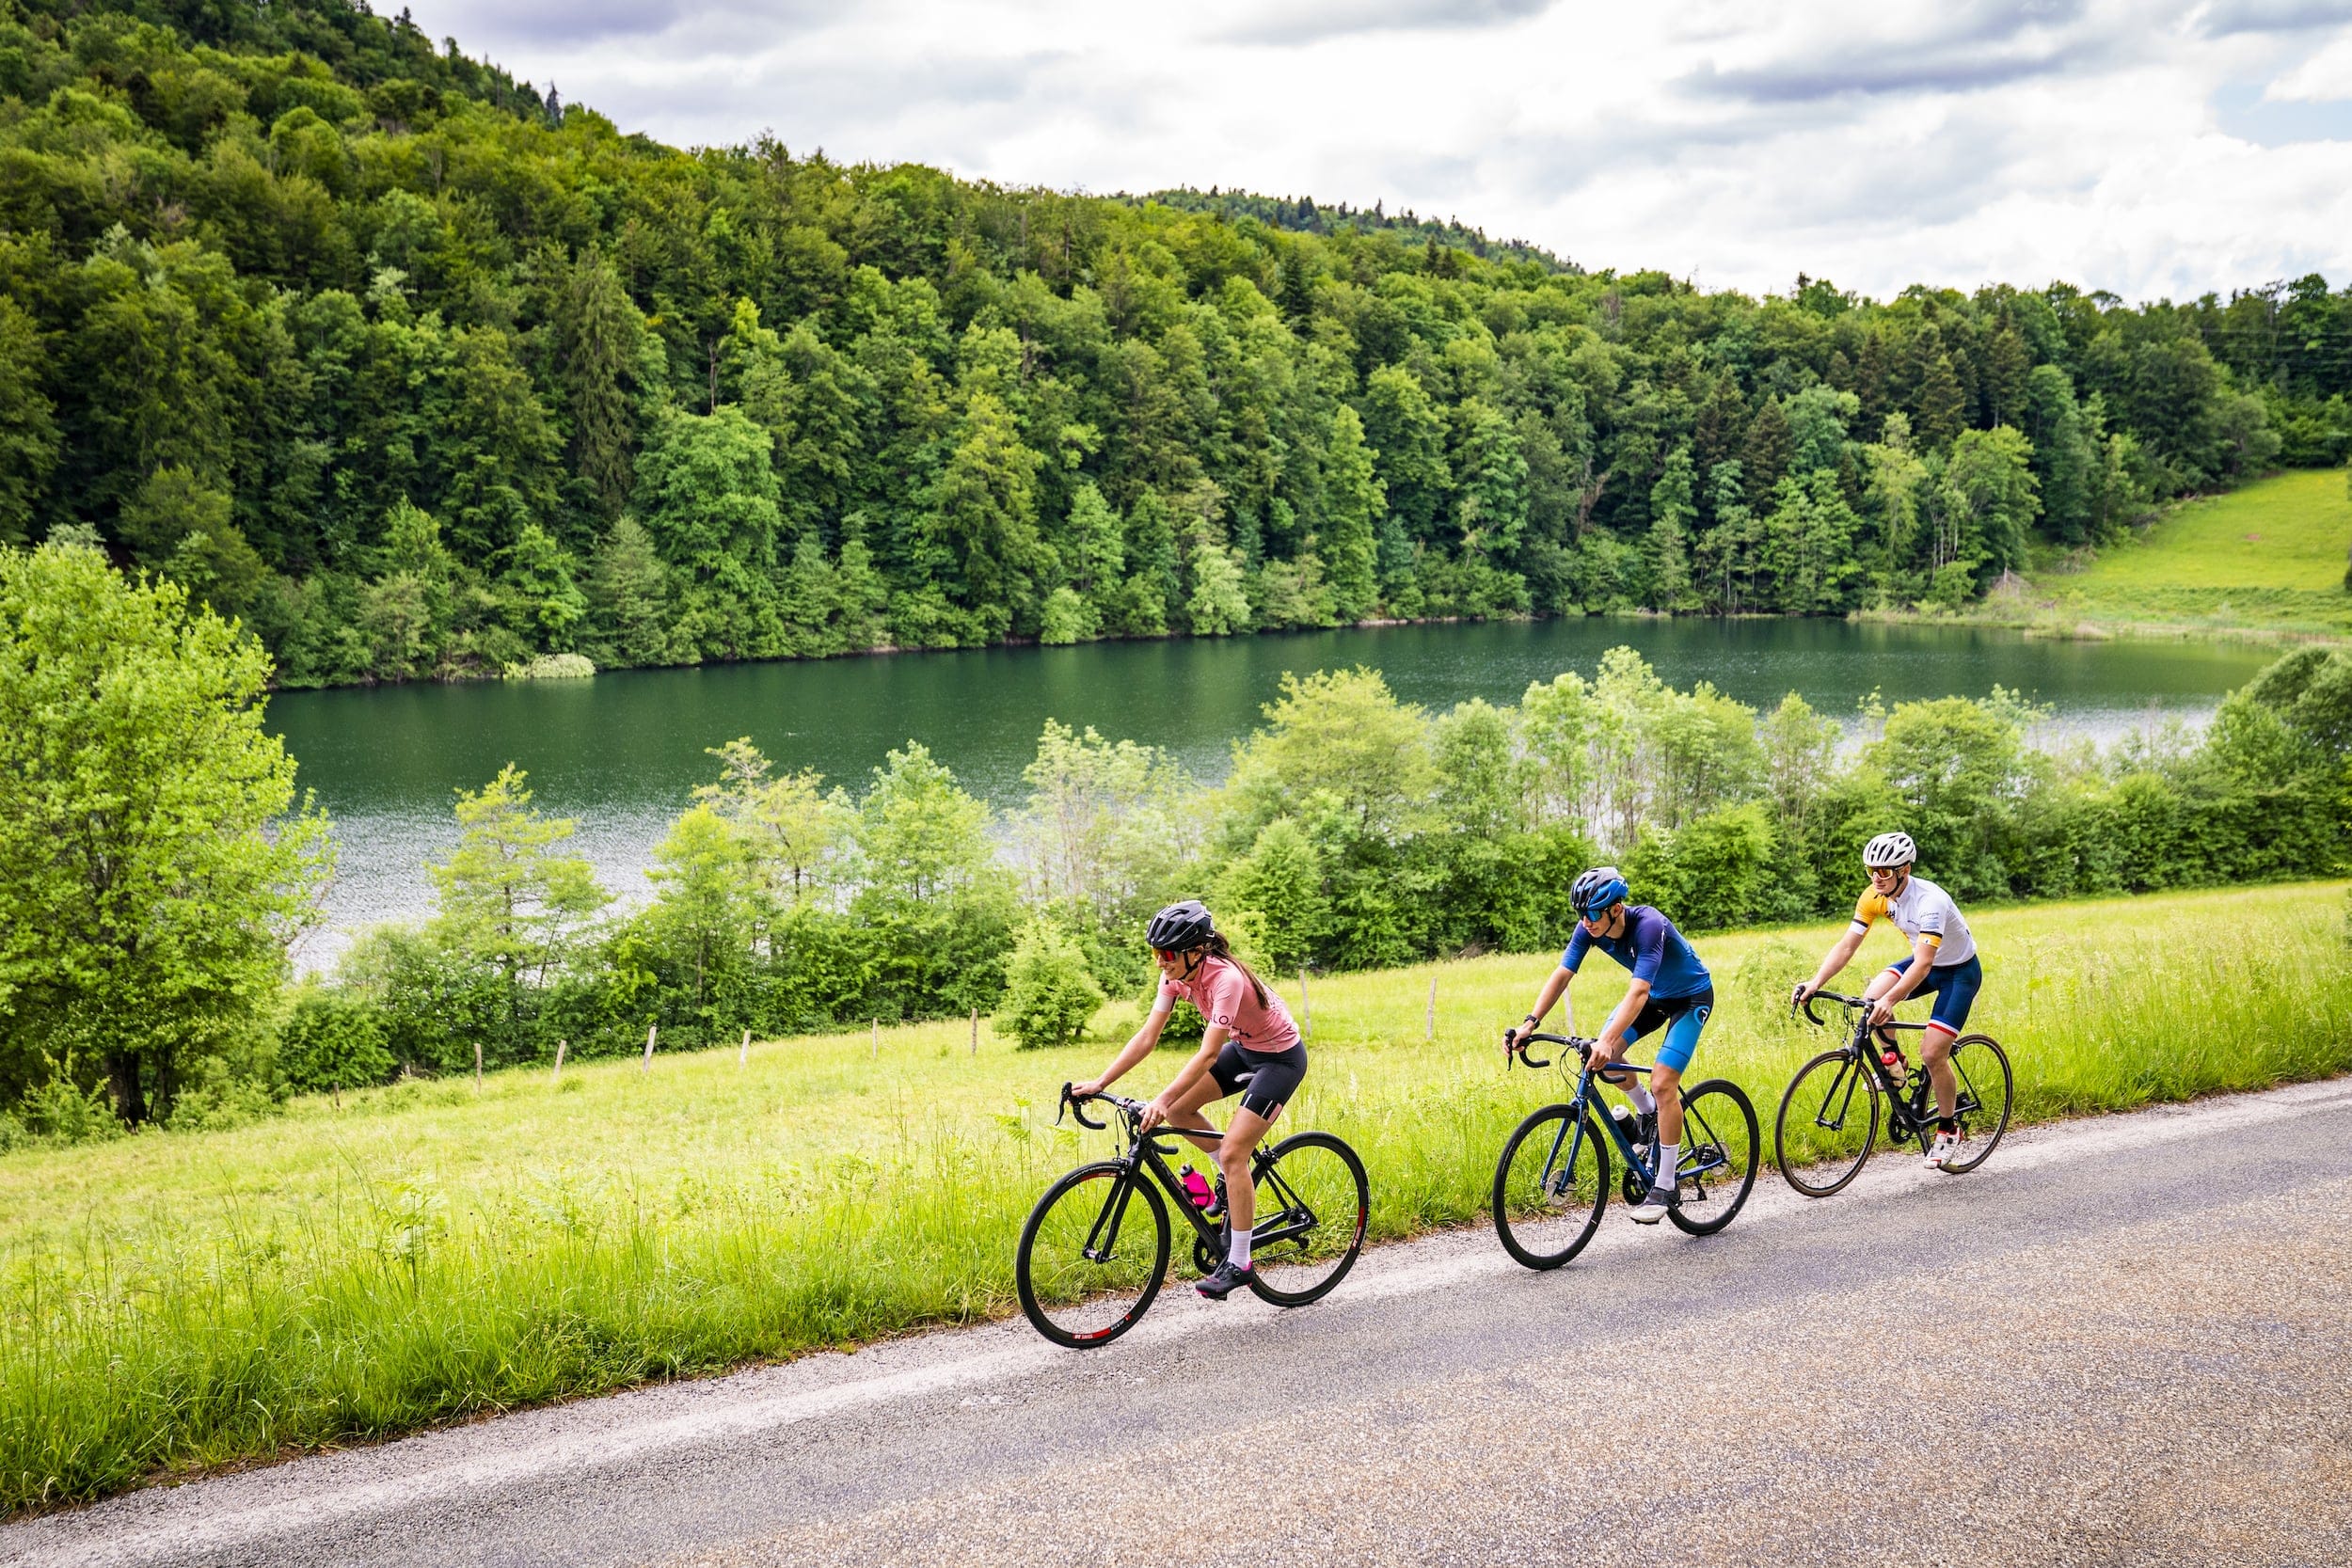 3 cyclists at the edge of a lake